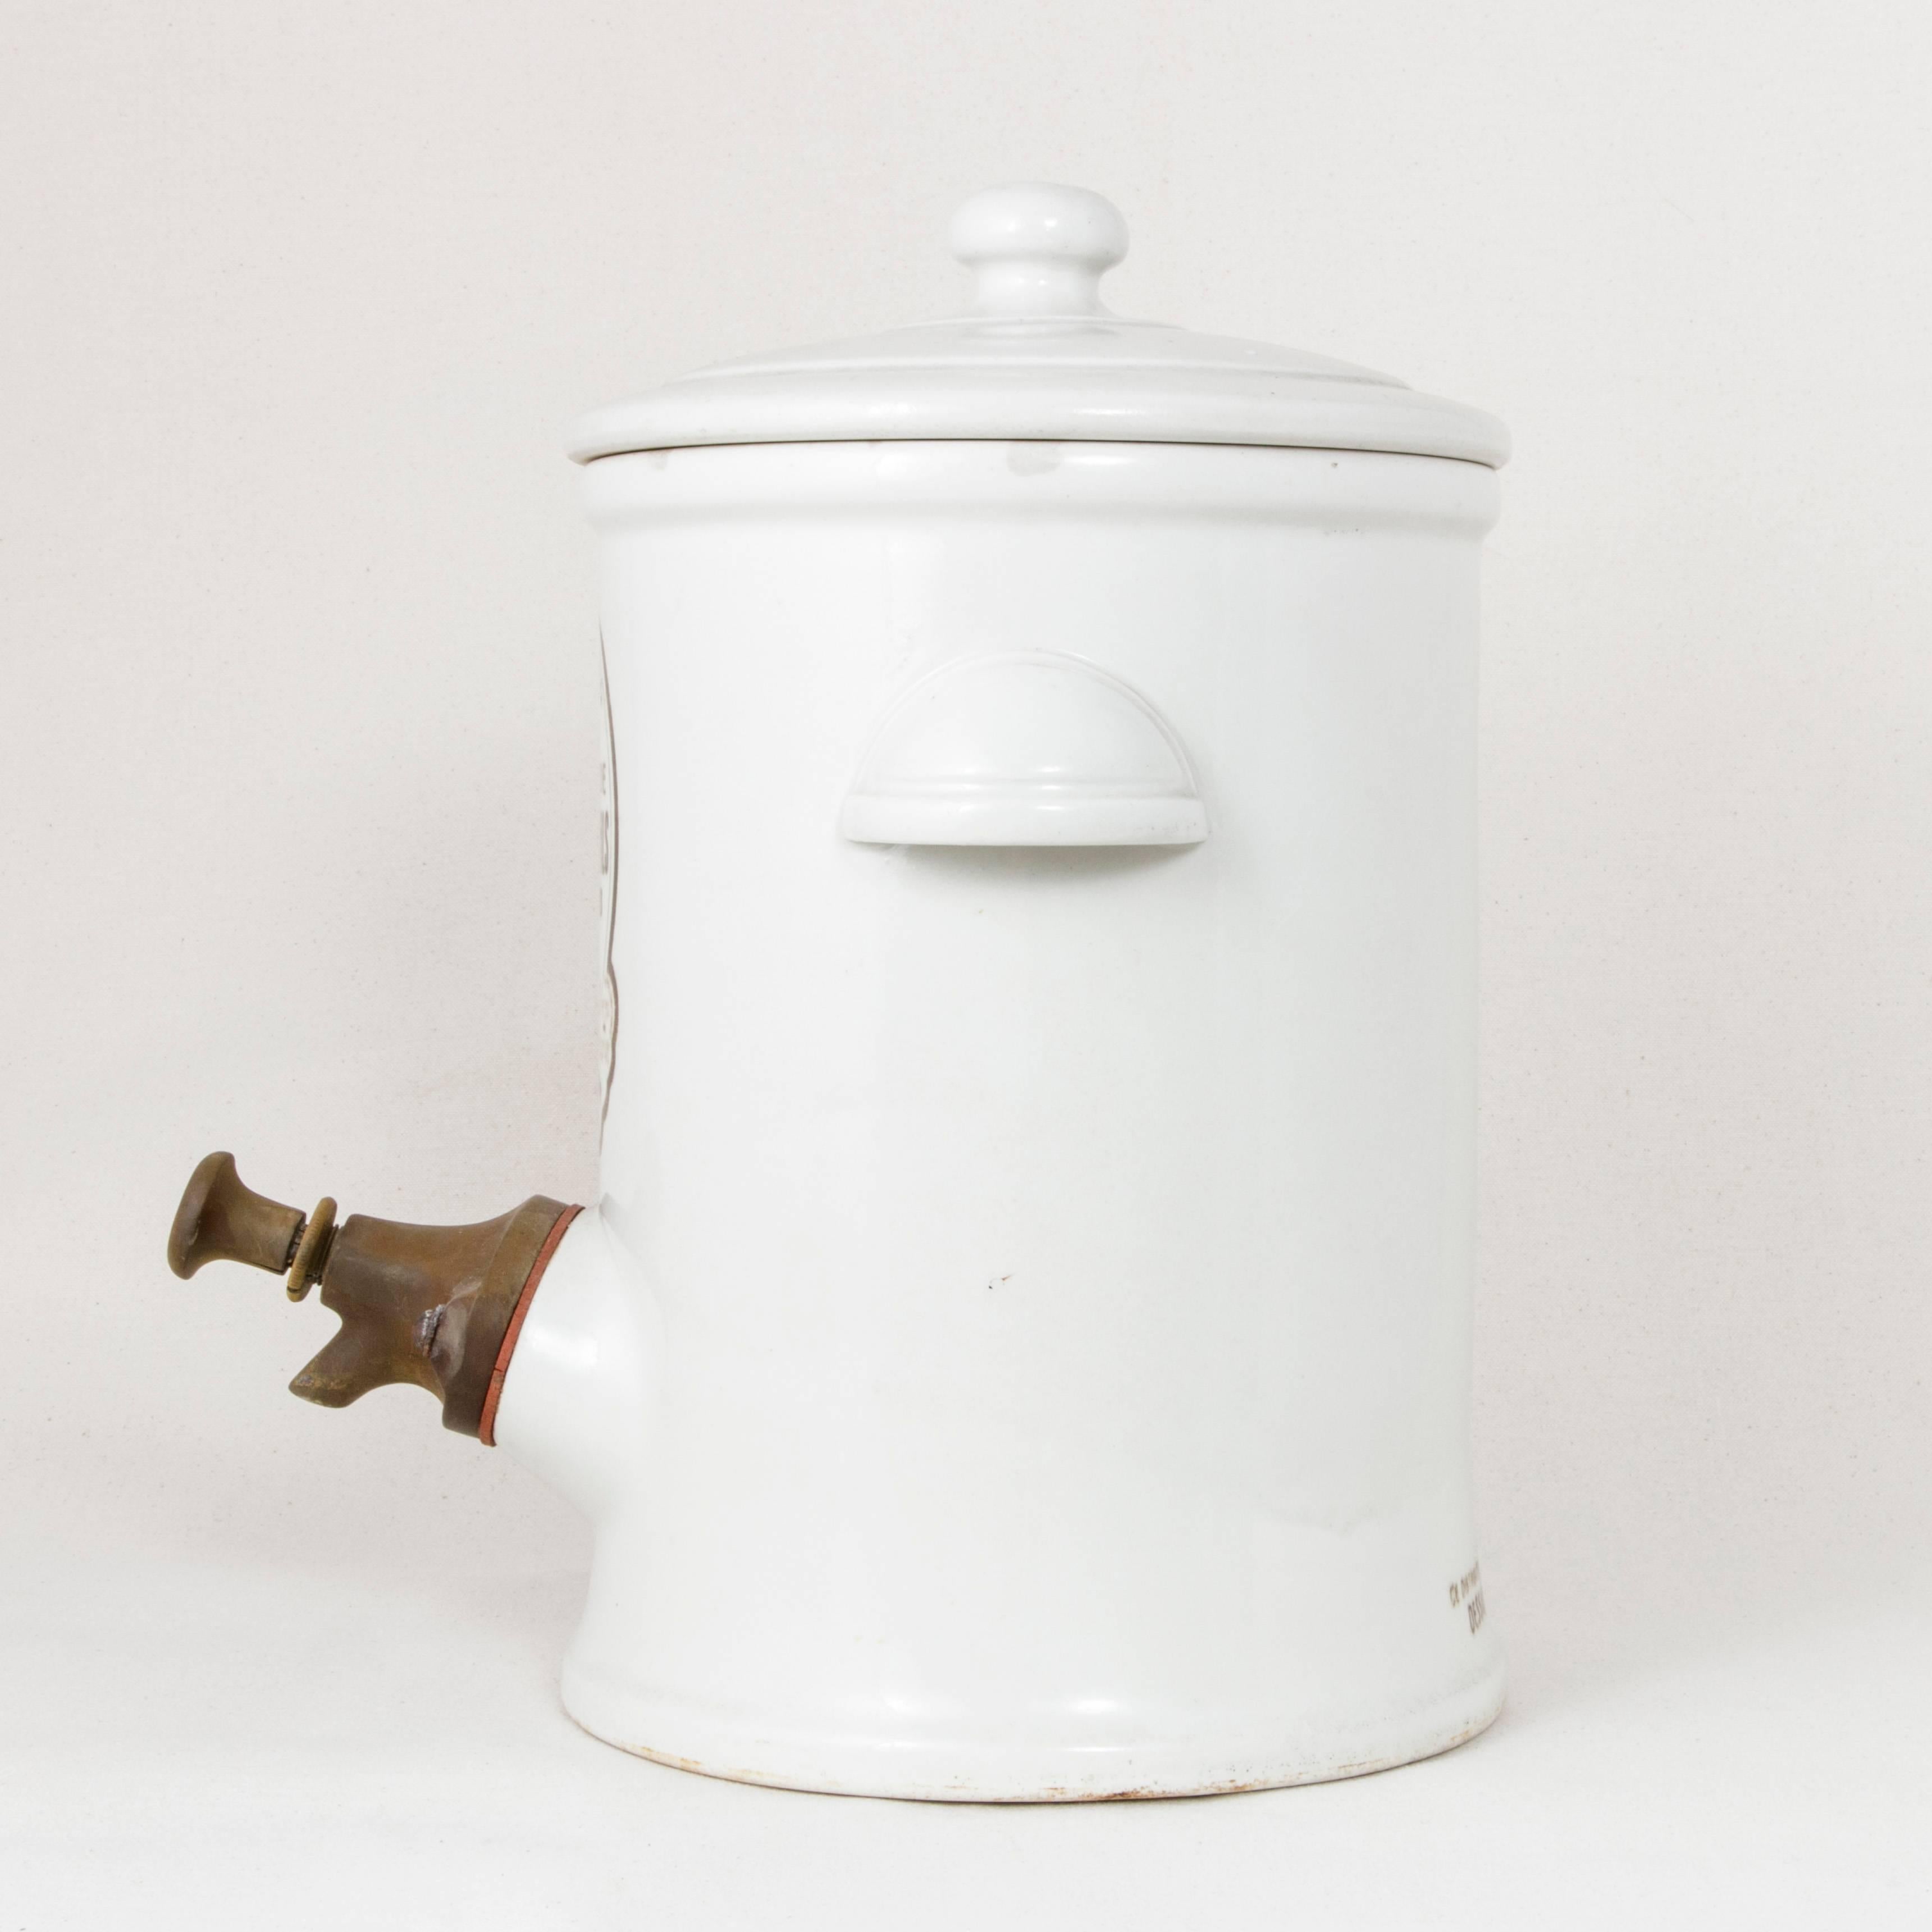 French Large Early 20th Century Faience Mustard Pot or Dispenser Marked Dessaux Fils